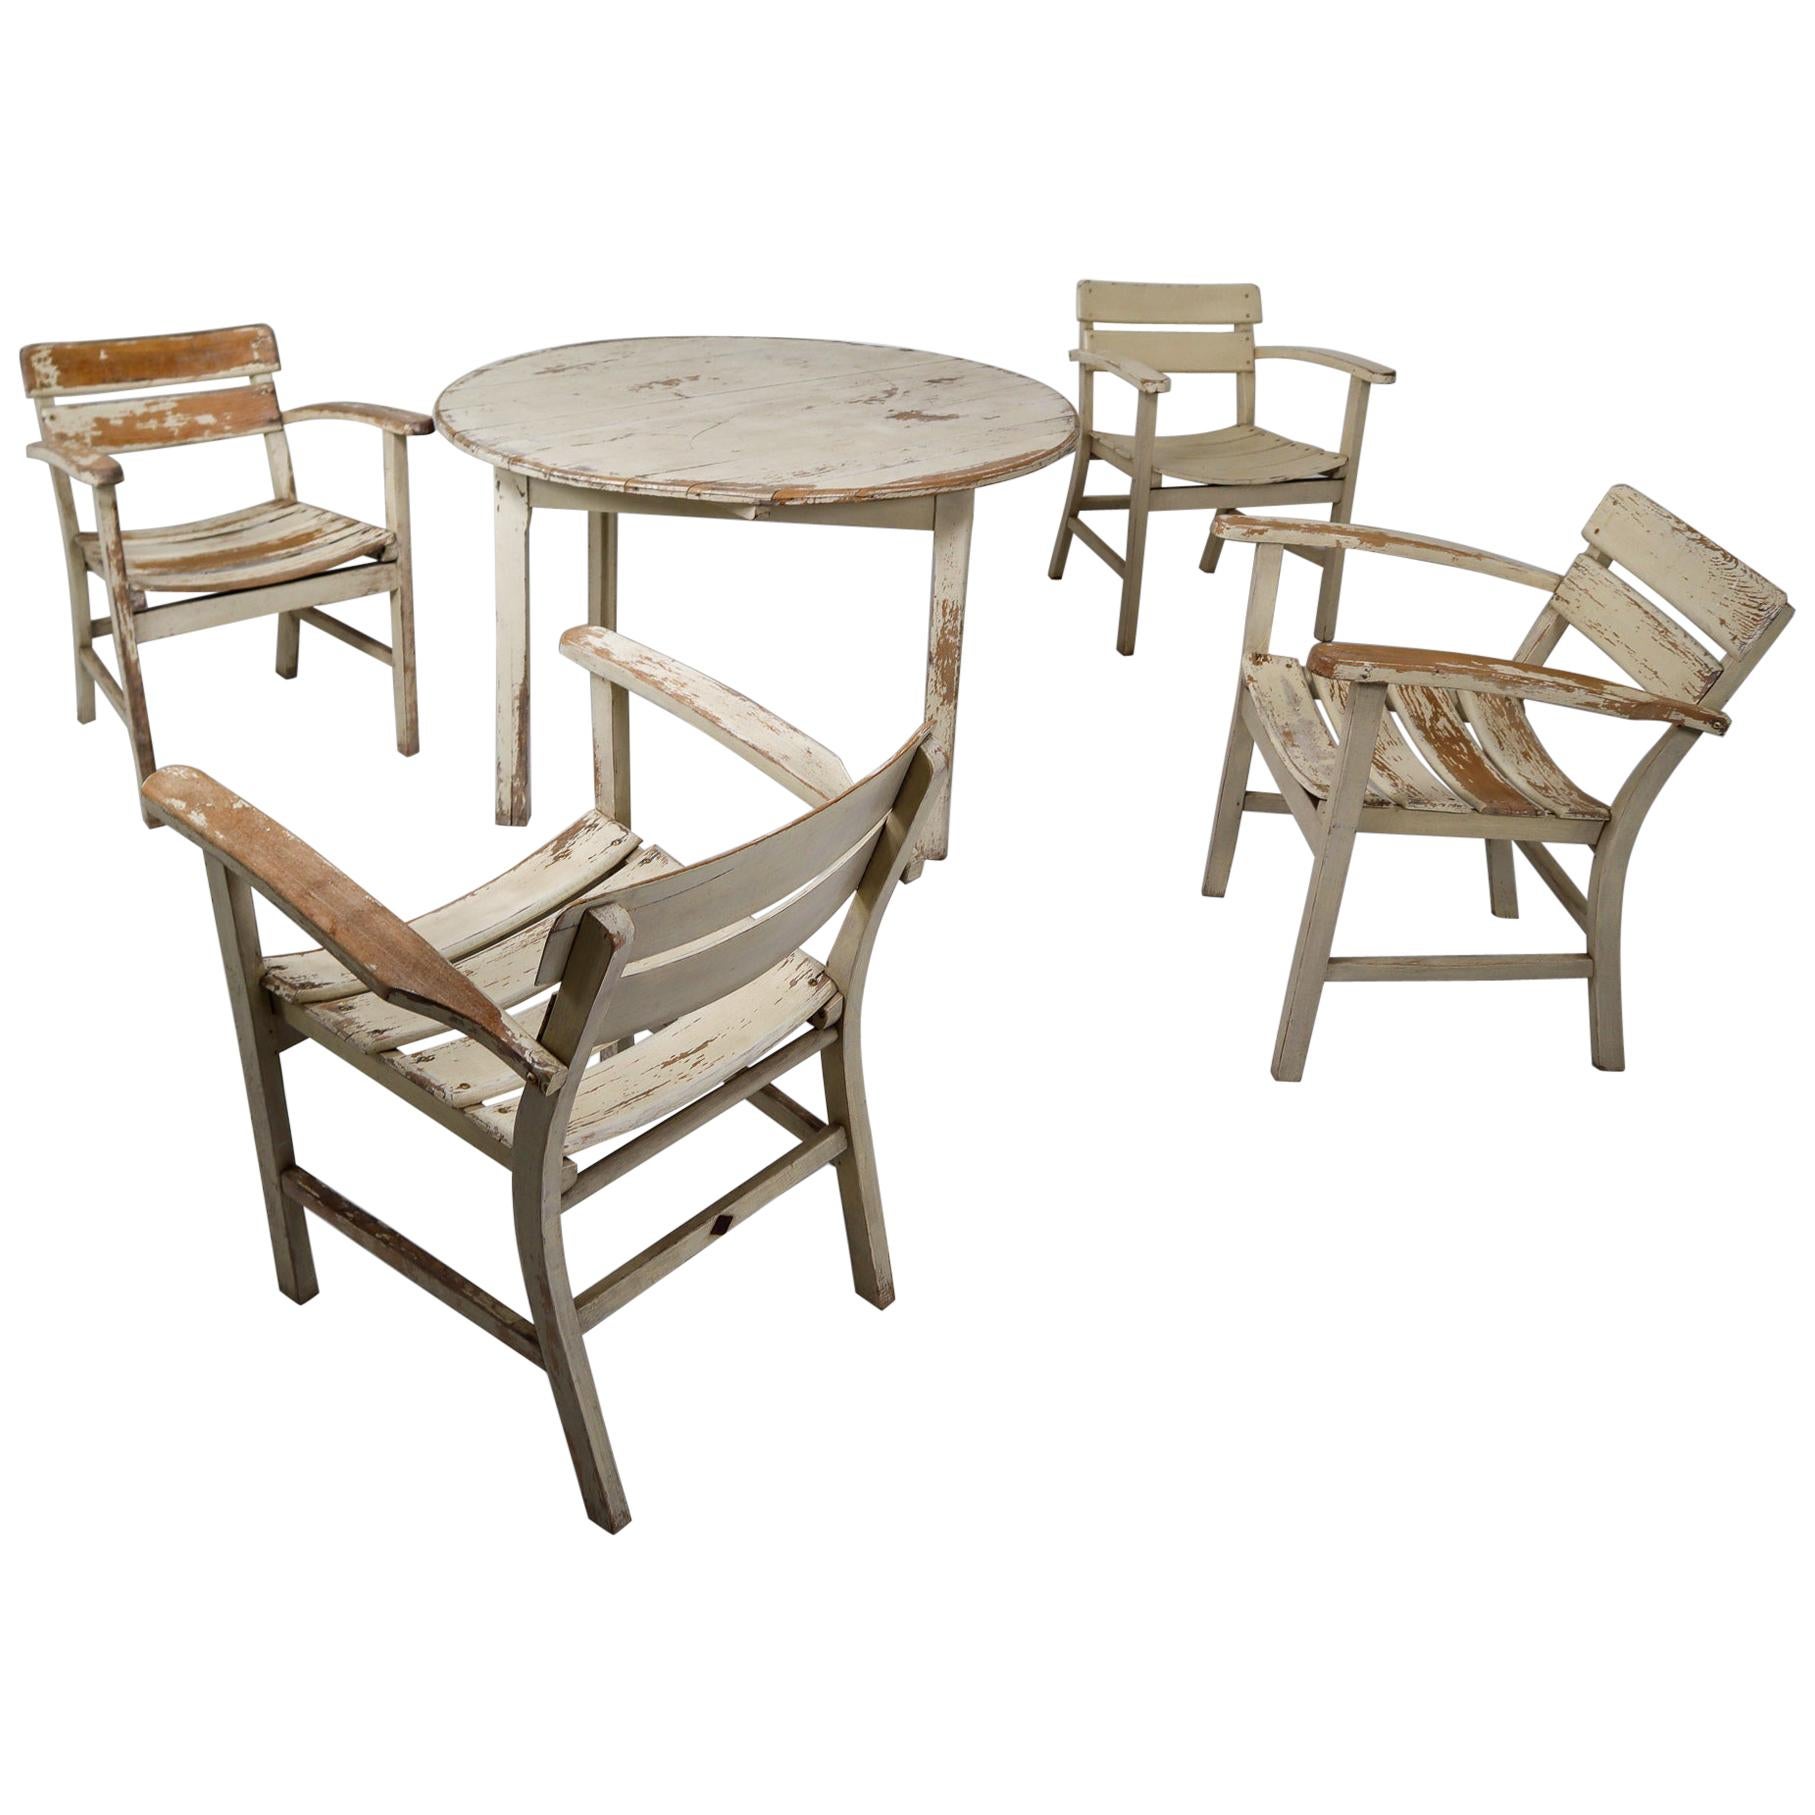 Patinated Wooden Garden Furniture, Germany, 1930s